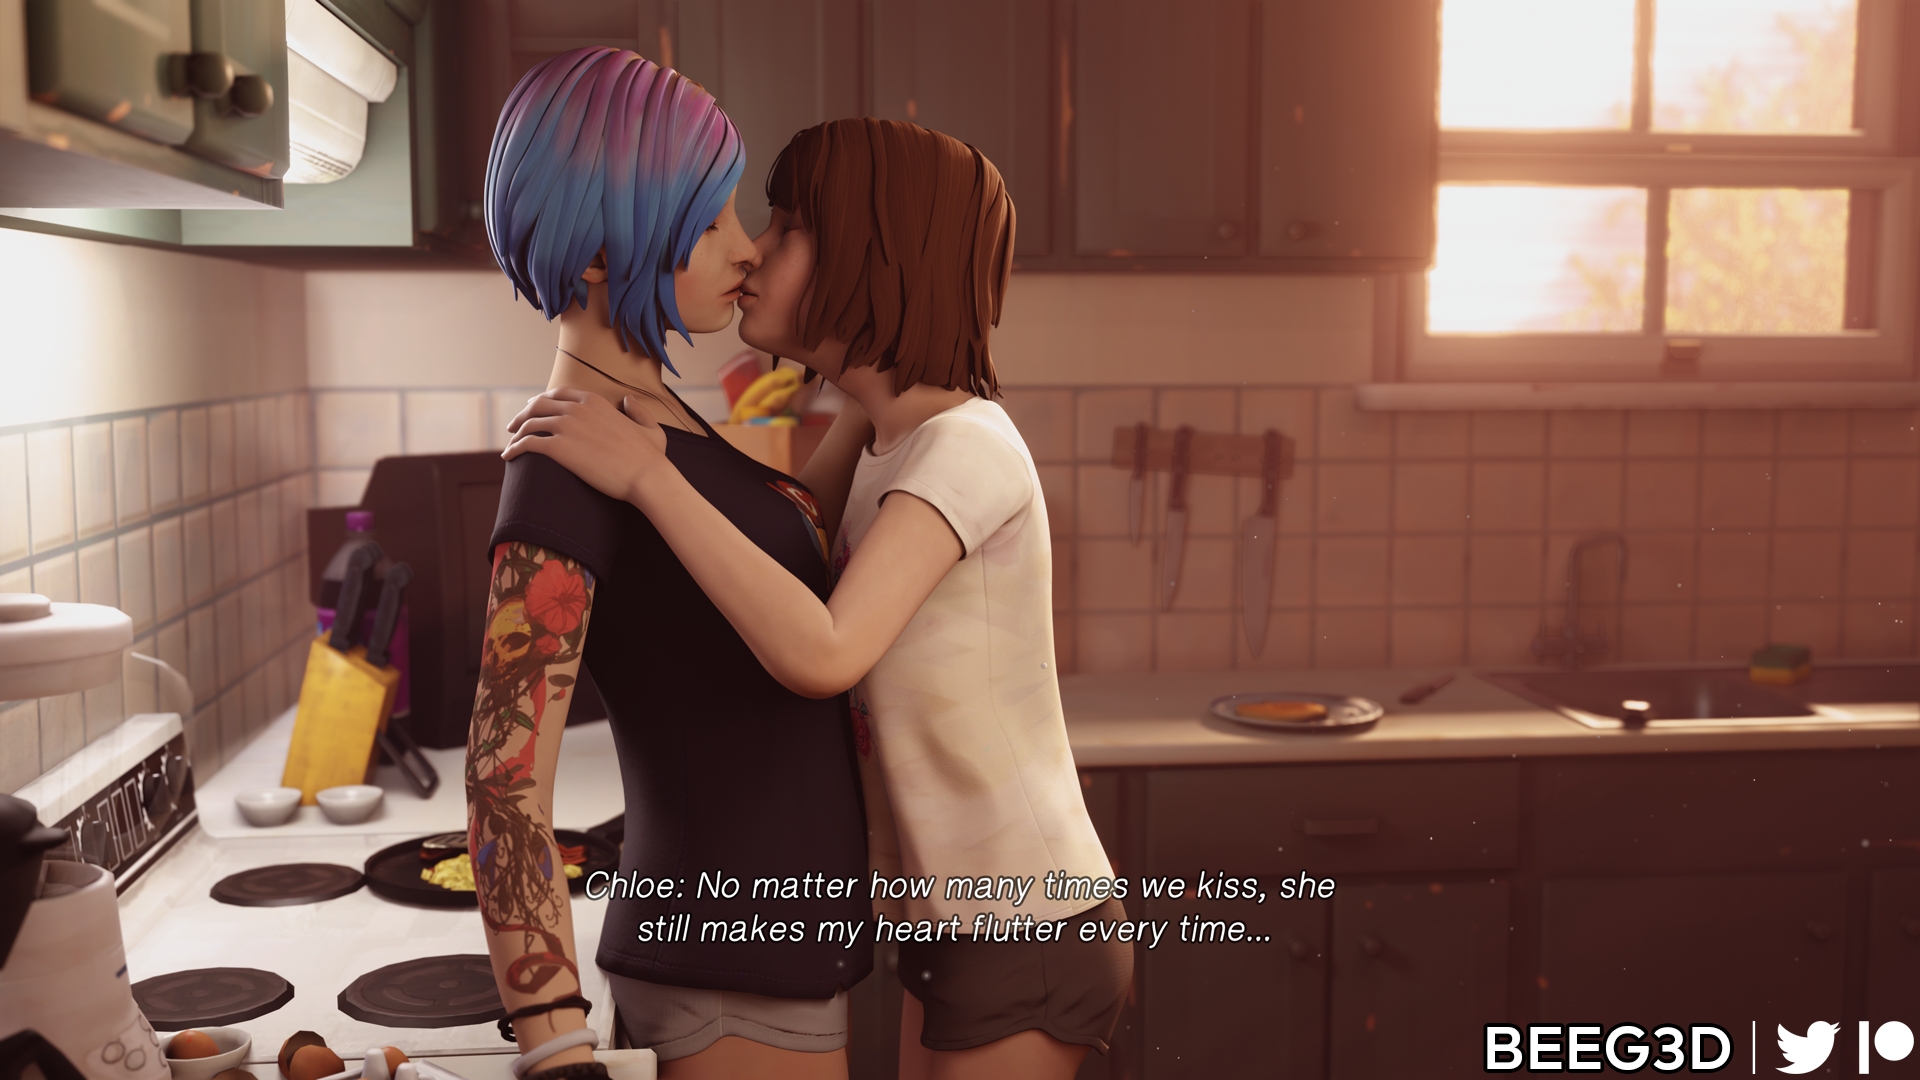 Max & Chloe - Morning Breakfast Part 1 Life Is Strange Max Caulfield Chloe Price Lesbian 2girls Kissing Eating Pussy Partially_clothed Bottomless 3